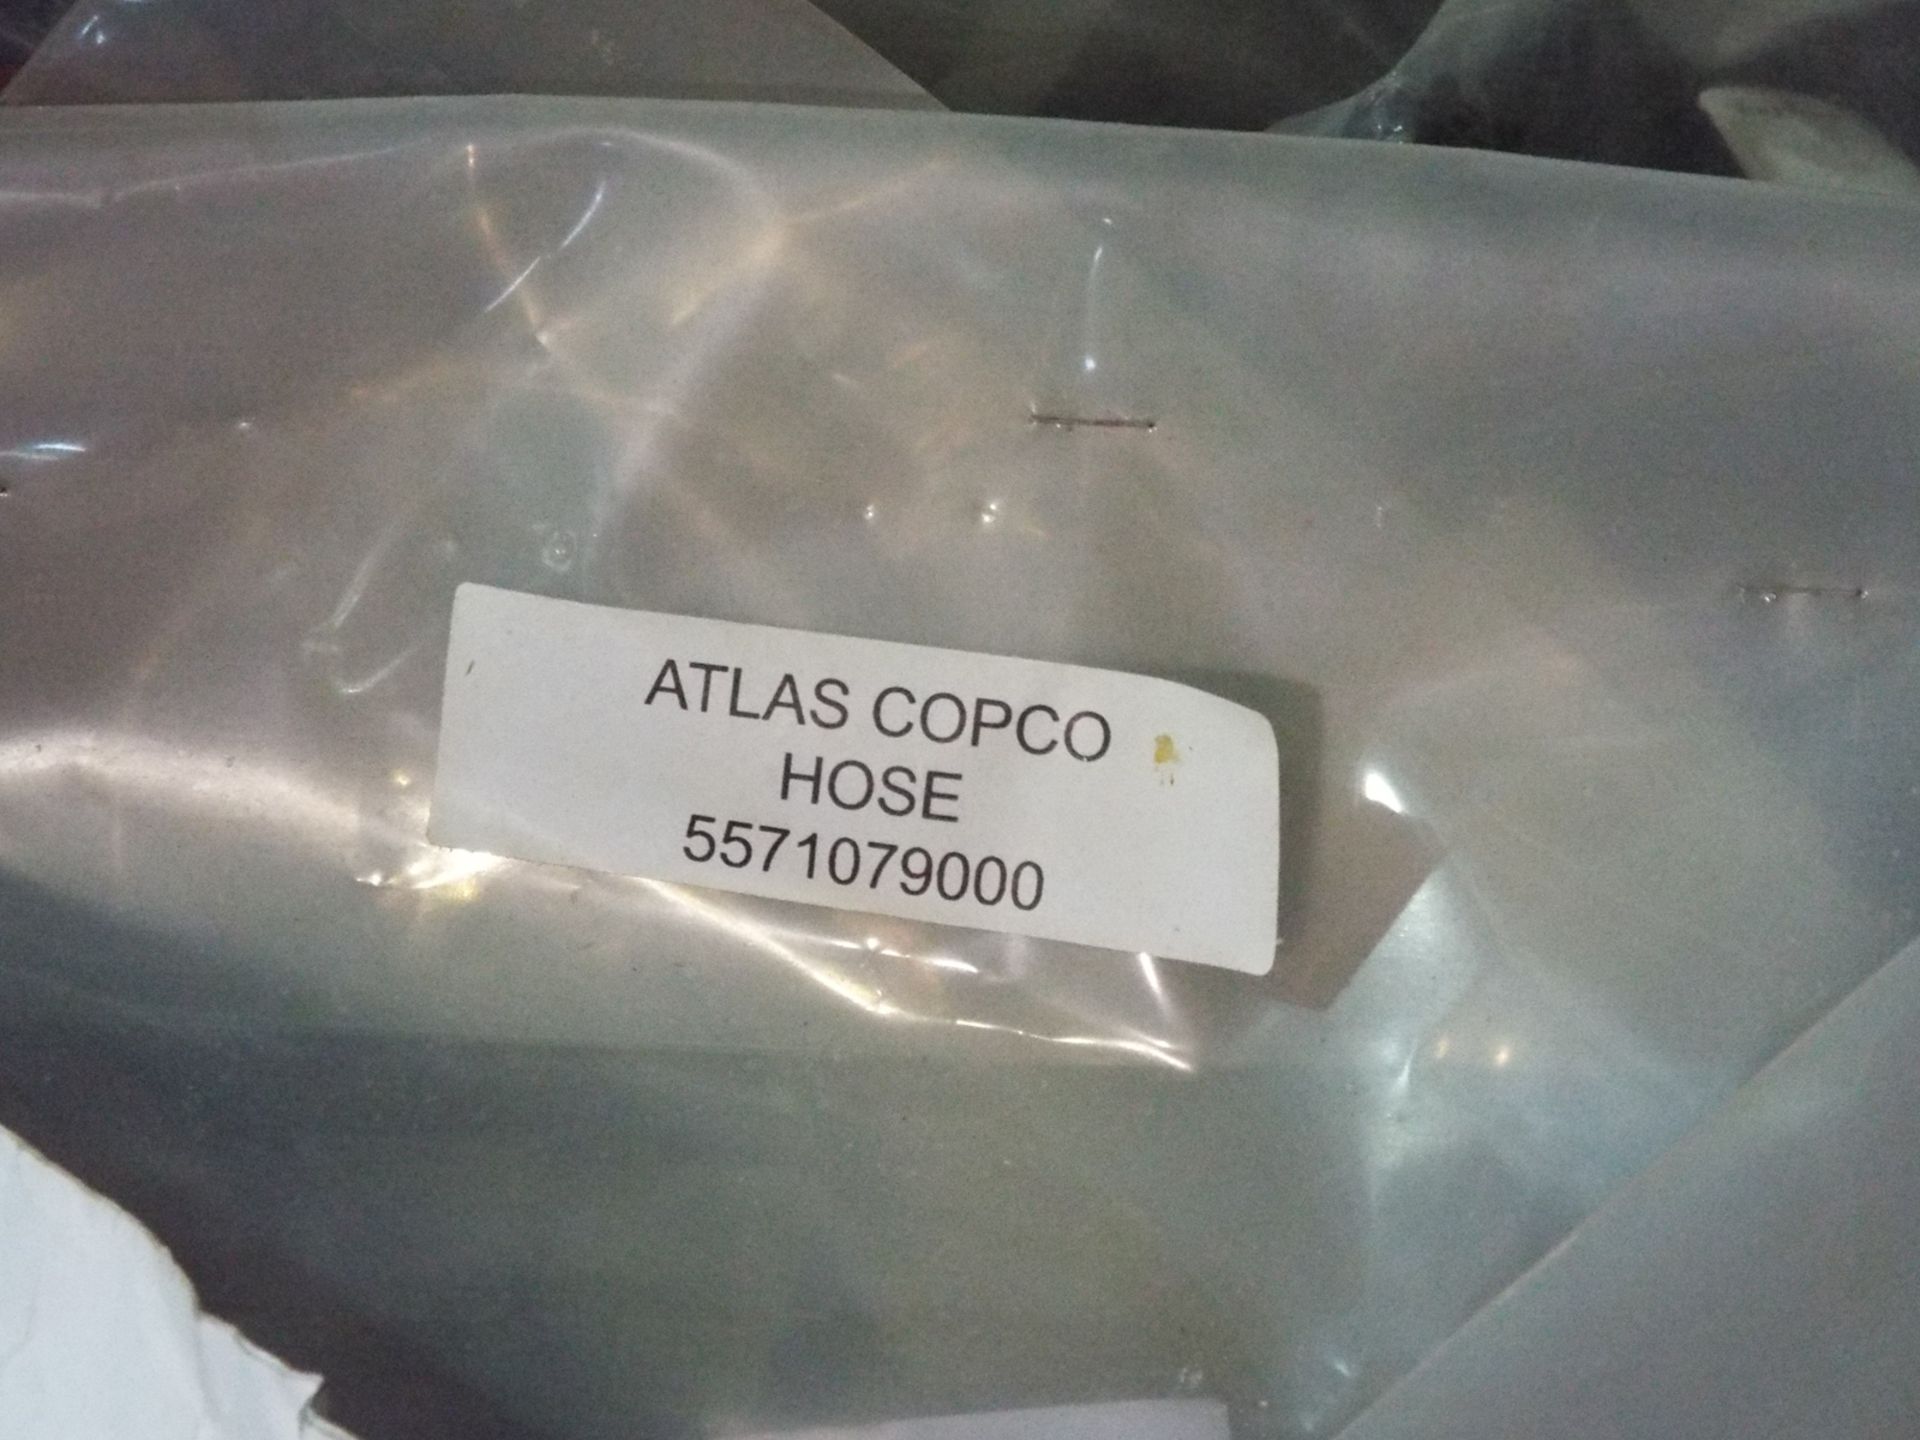 LOT/ ATLAS COPCO PARTS INCLUDING PIPE, FLOW CONTROL, NEEDLE VALVE, SEATBELT, HORN, AND HOSE - Image 8 of 14